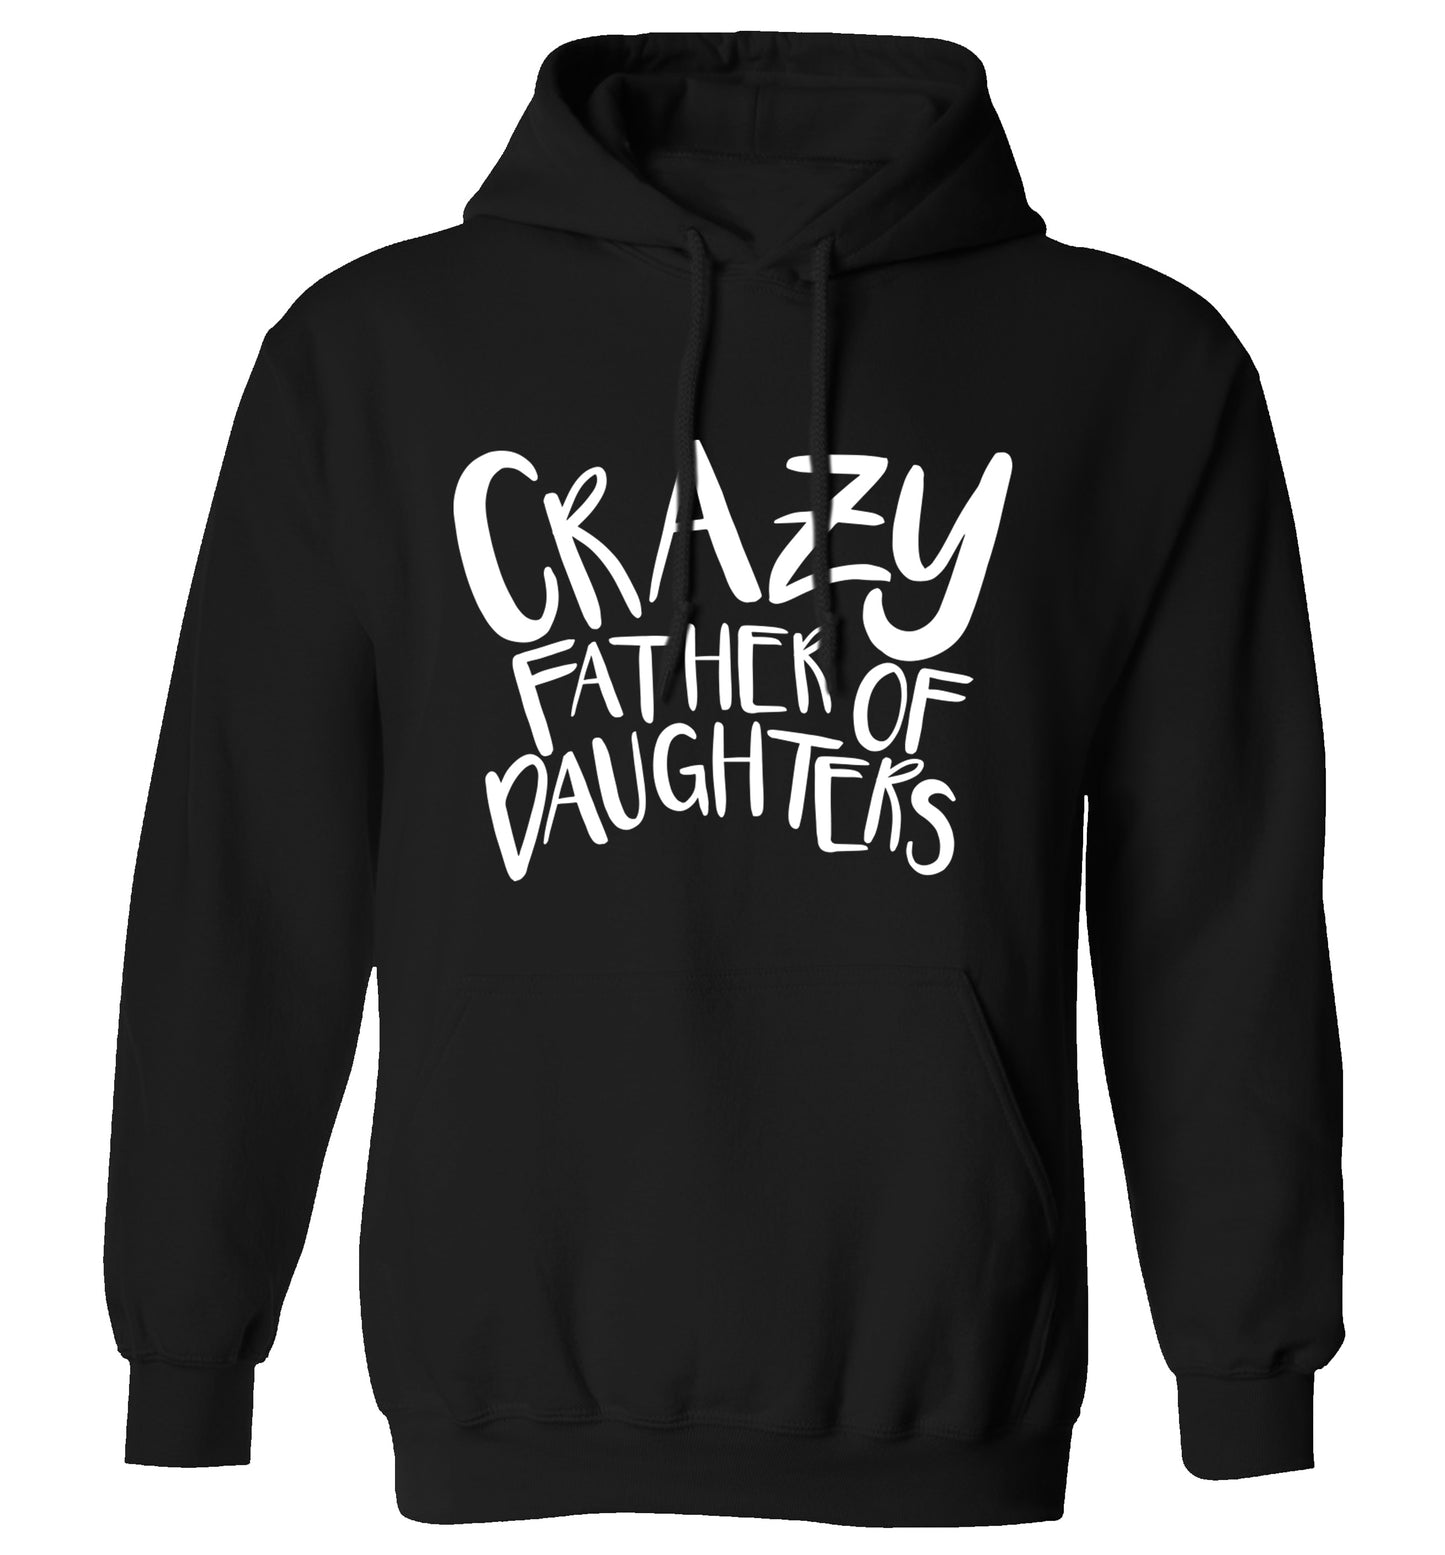 Crazy father of daughters adults unisex black hoodie 2XL